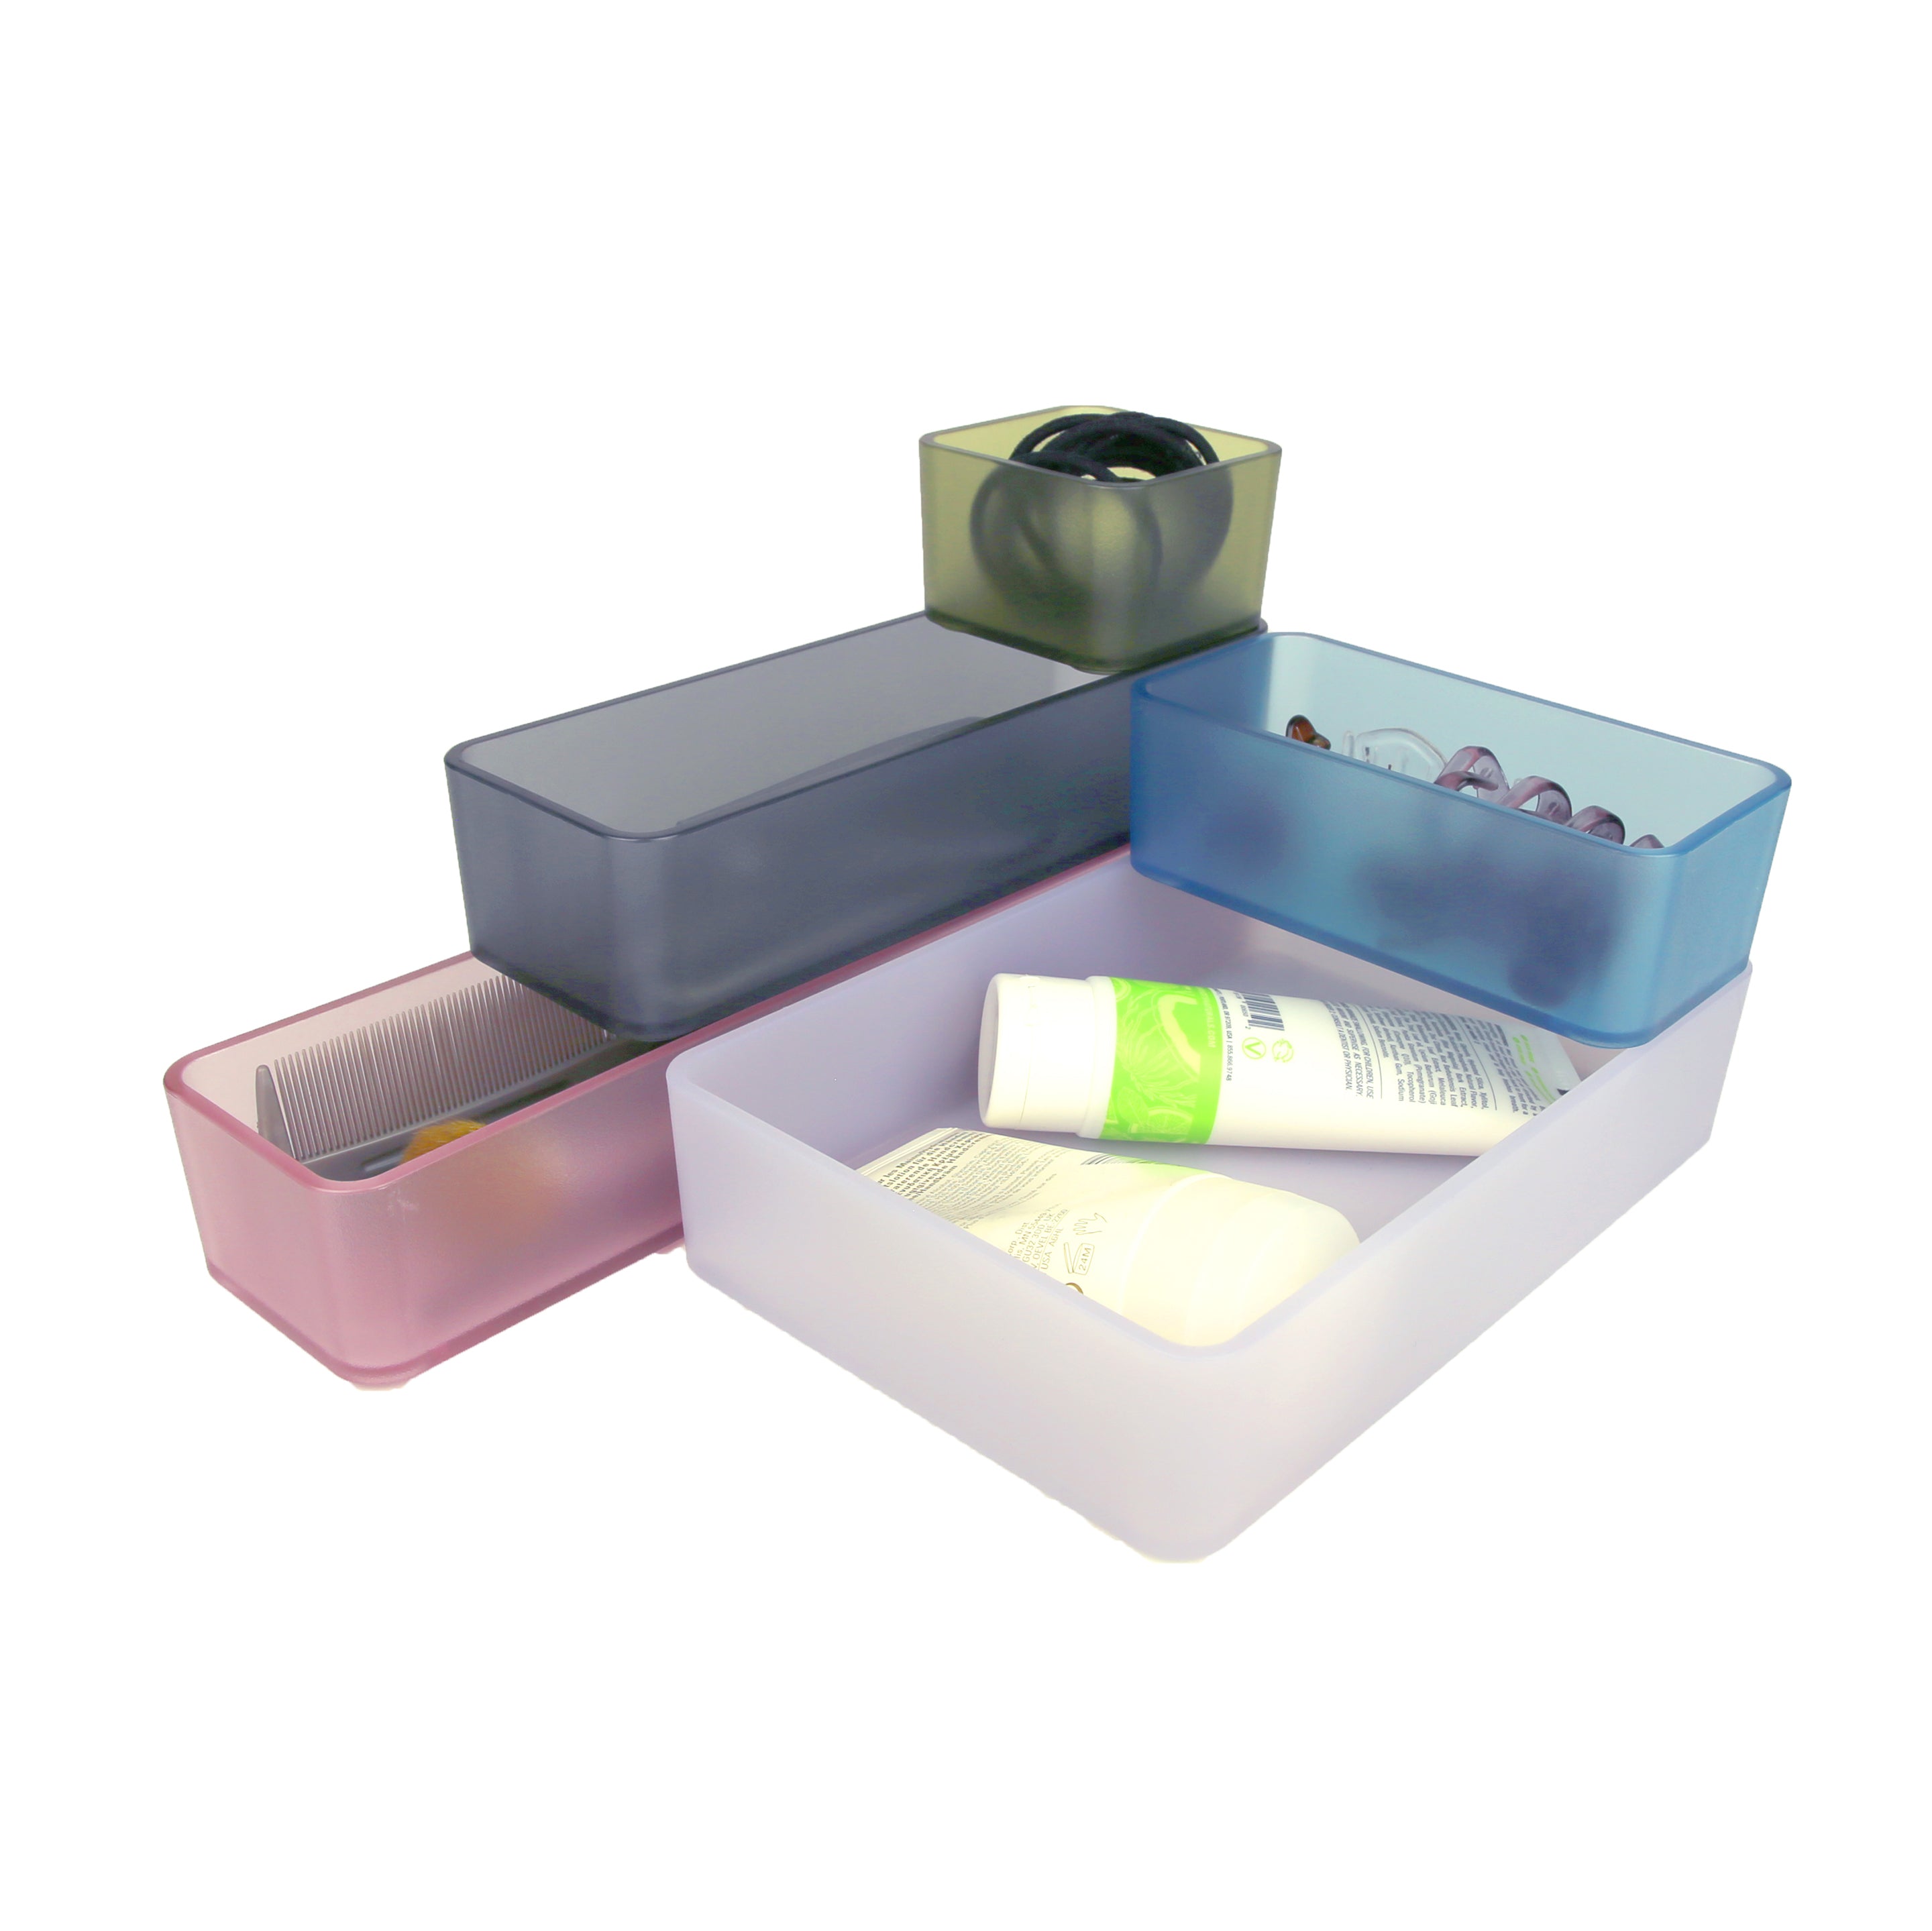 reSTAK recycled stackable organizing bins set of 5